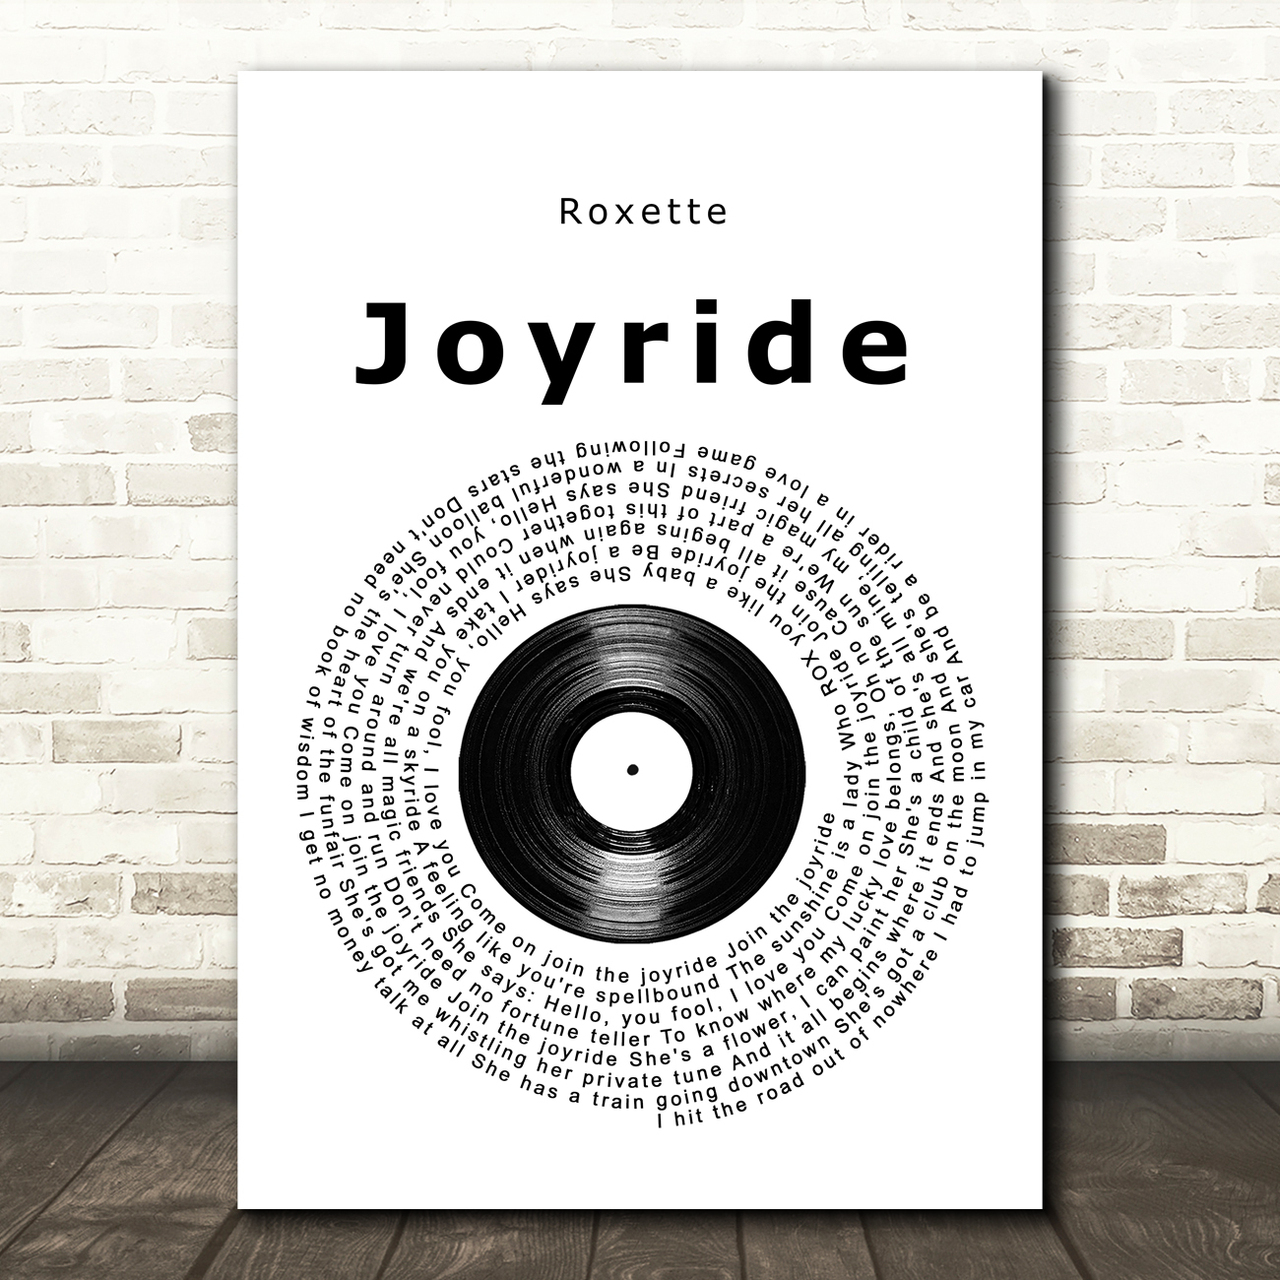 Roxette Joyride Vinyl Record Song Lyric Quote Music Poster Print